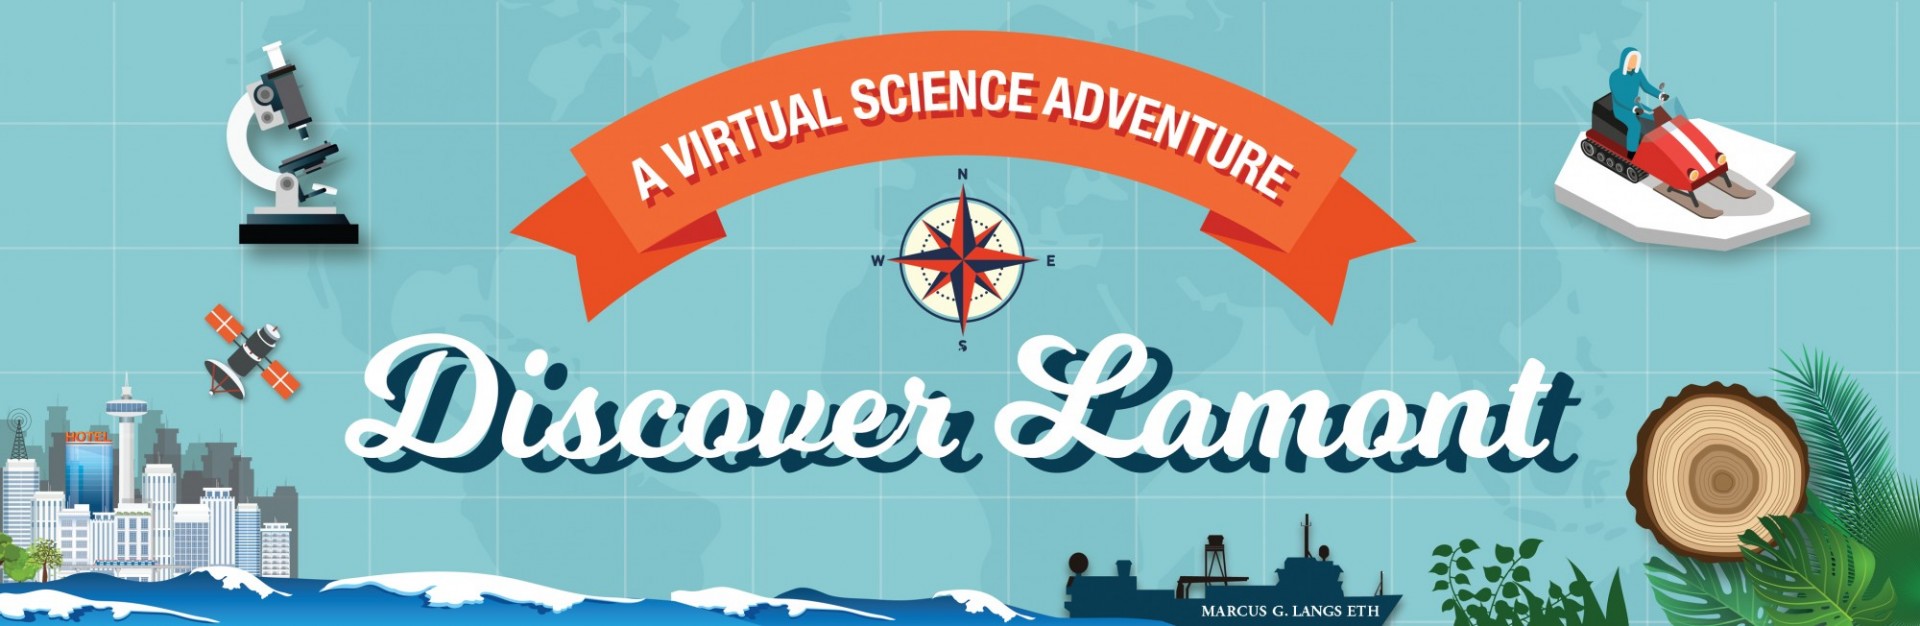 Discover Lamont: A Virtual Science Adventure banner